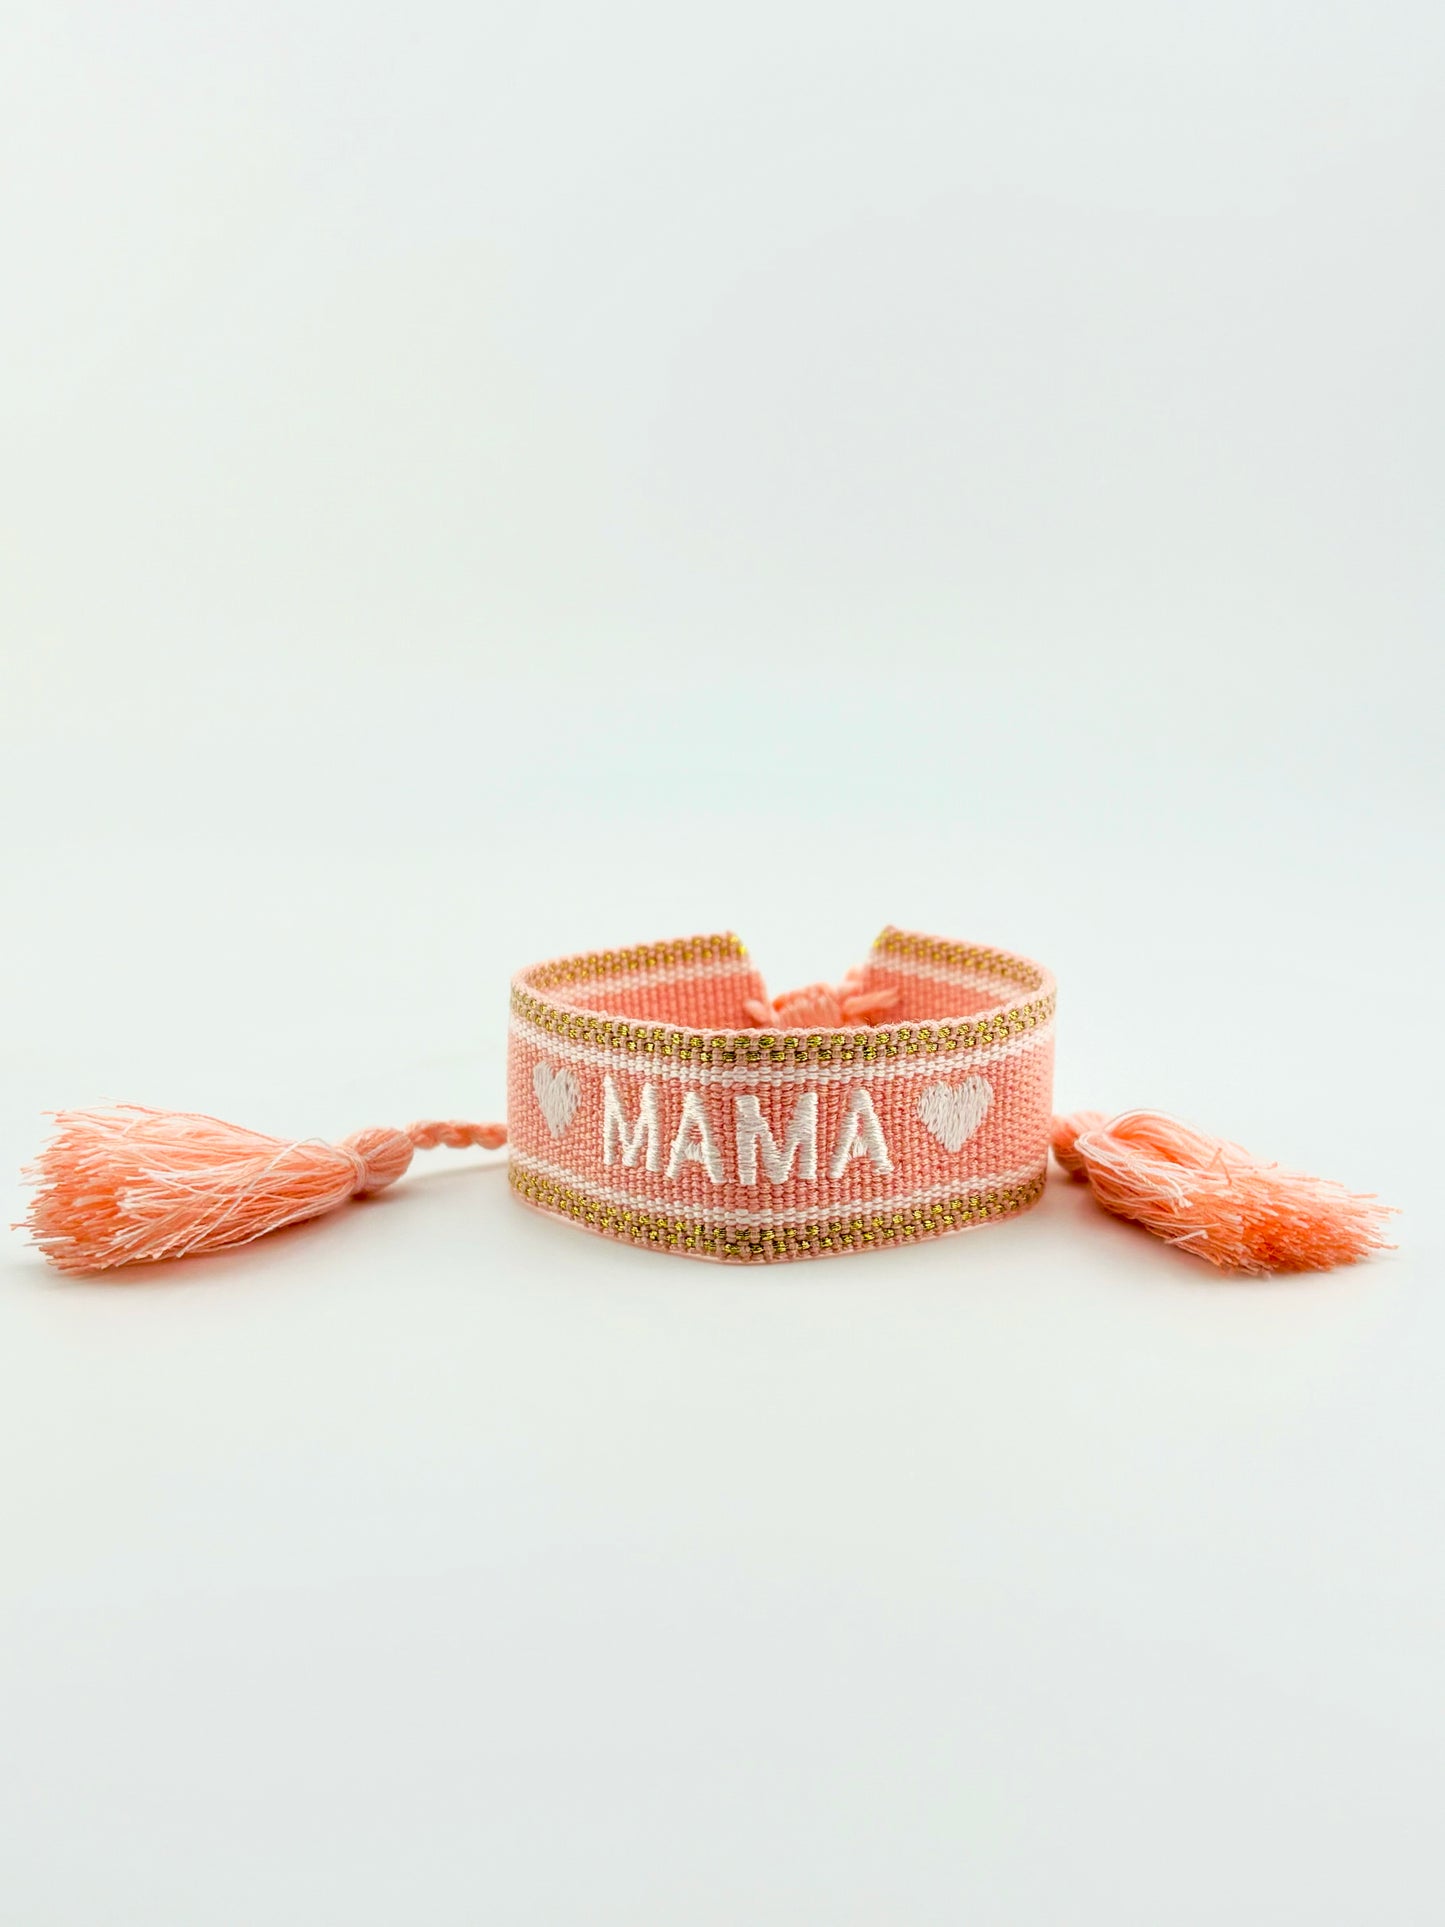 Mama coral white and gold woven adjustable bracelet